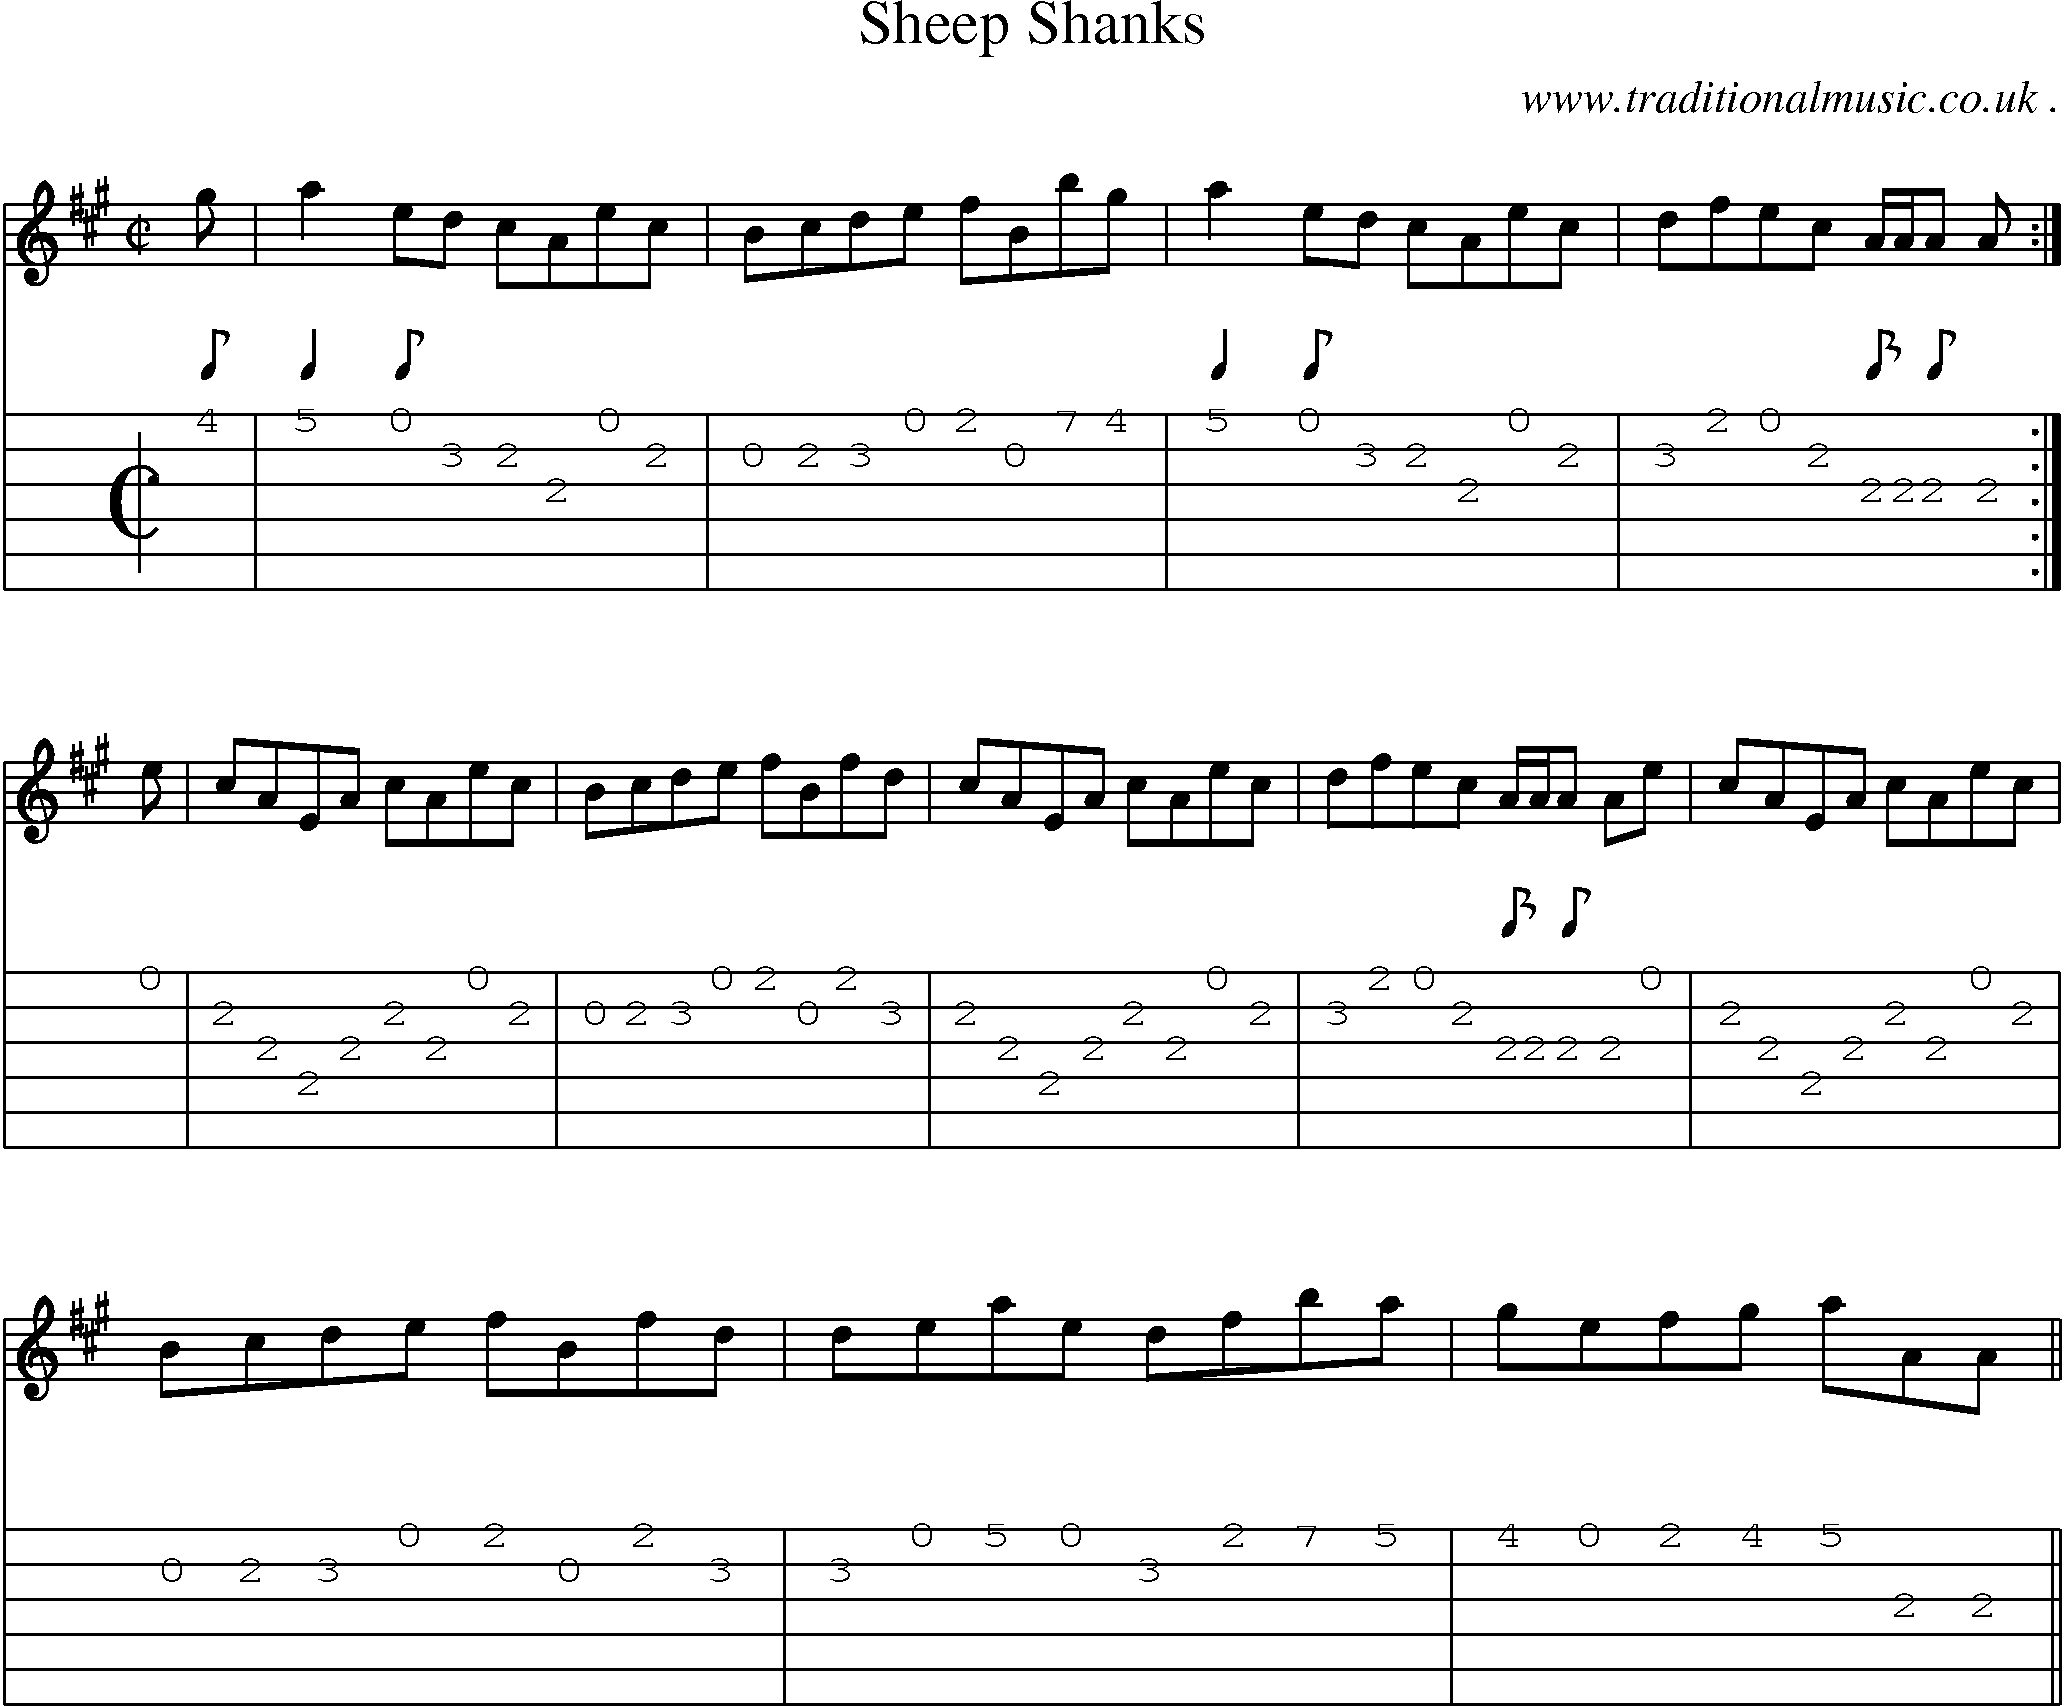 Sheet-music  score, Chords and Guitar Tabs for Sheep Shanks